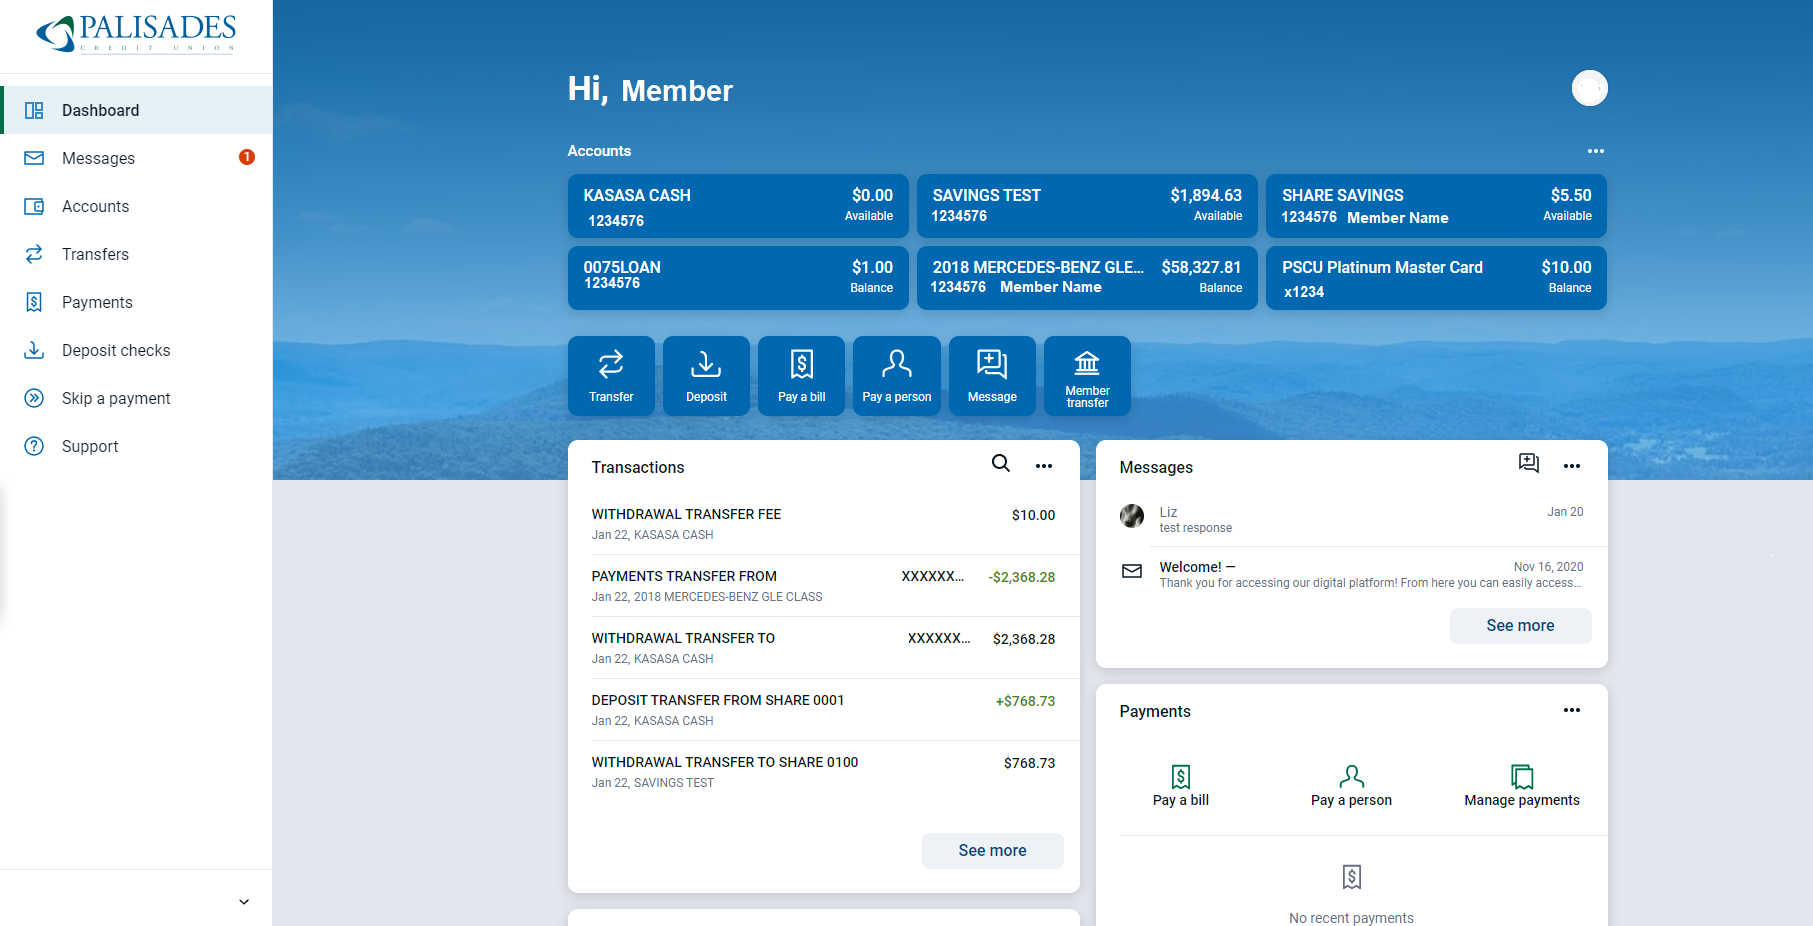 Screen shot of Palisades CU online banking interface with deposit and loan account information